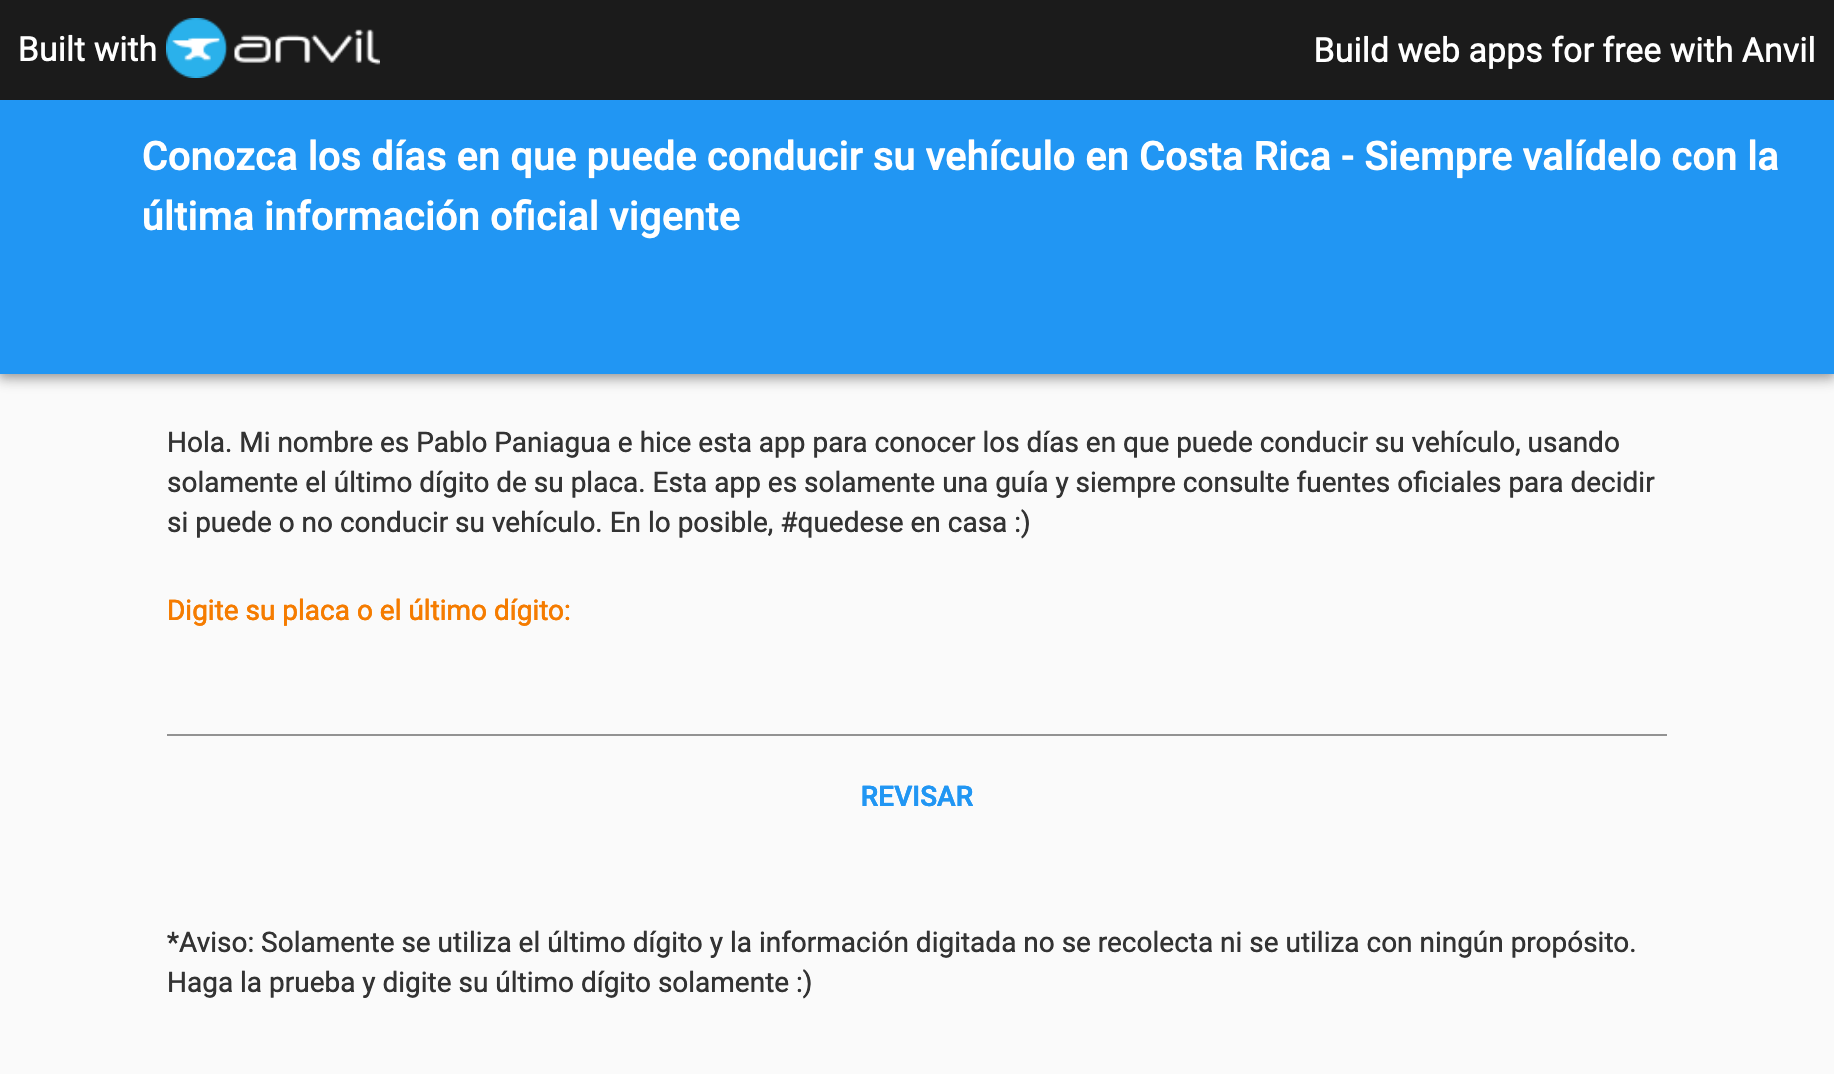 Pablo&rsquo;s app for checking vehicle lockdown restrictions in Costa Rica